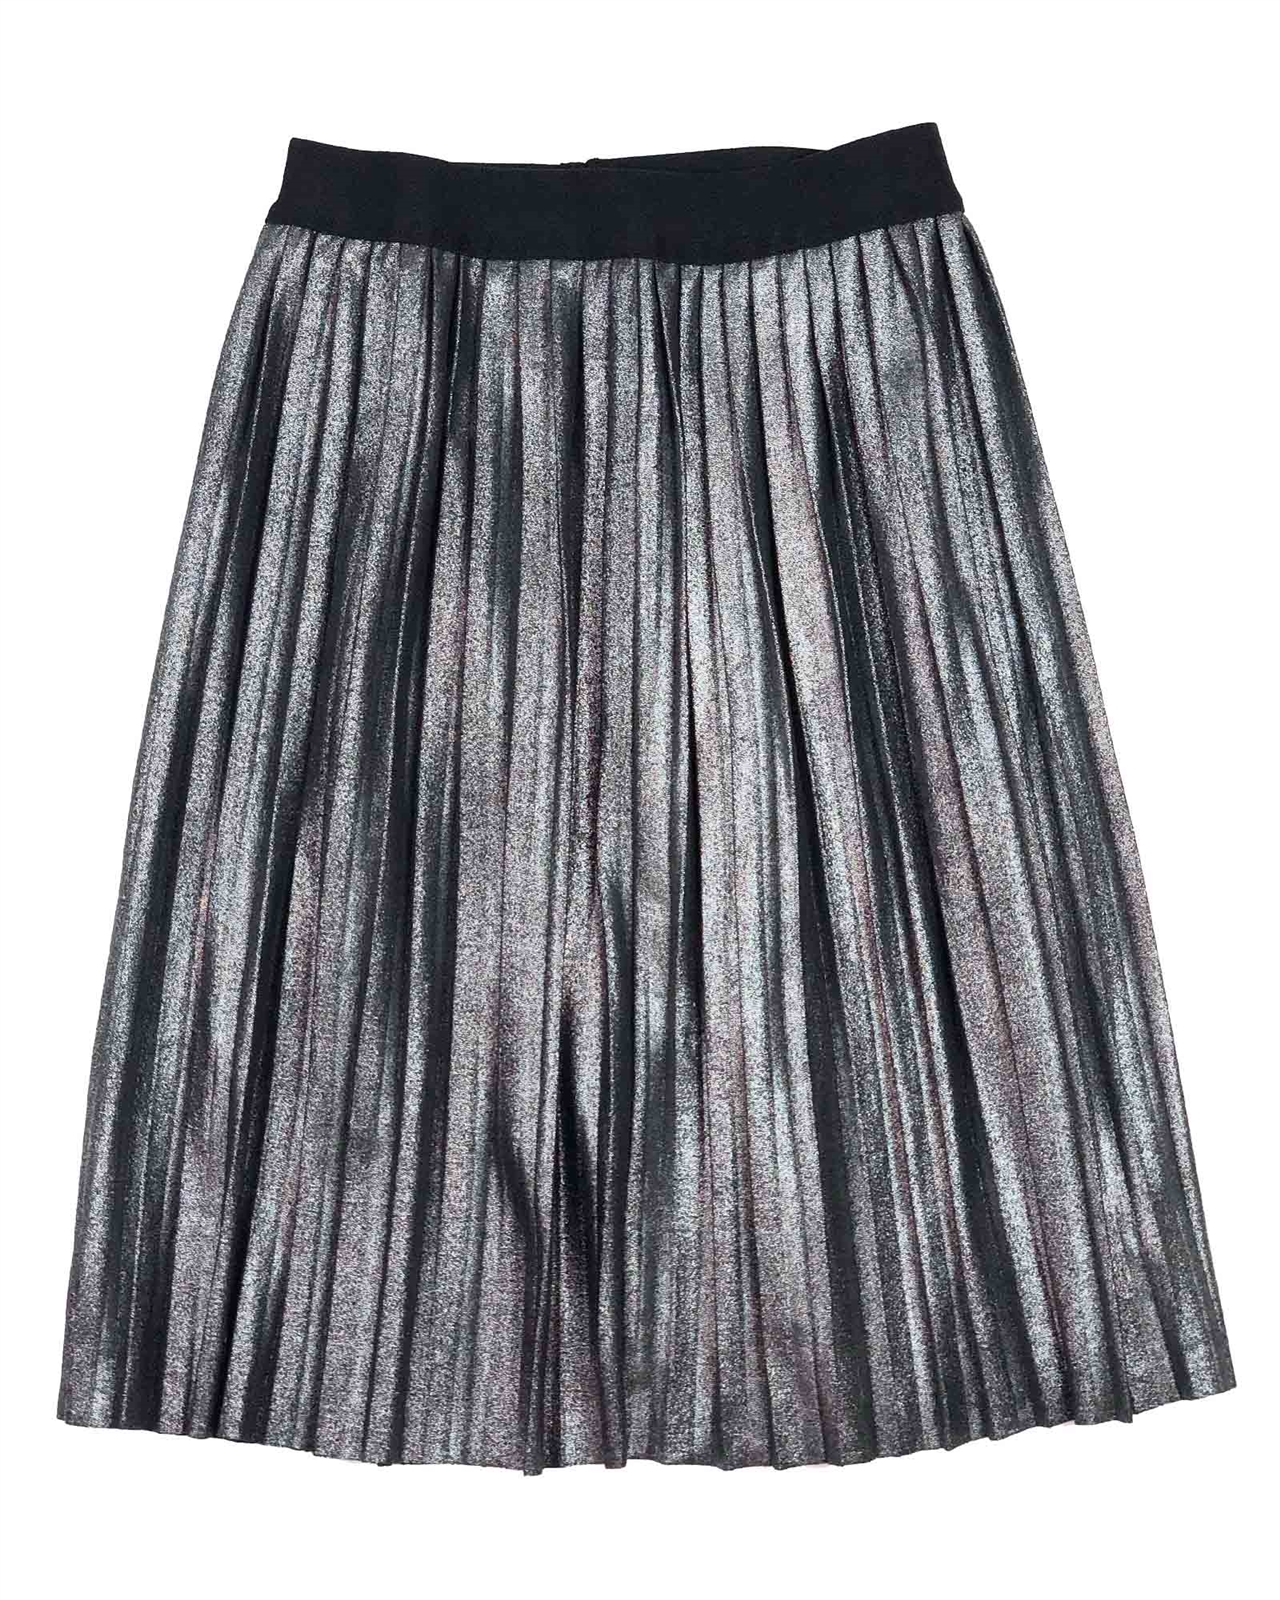 Glitter Shiny Sequin Pencil Knee Length Party Midi Skirt - Power Day Sale